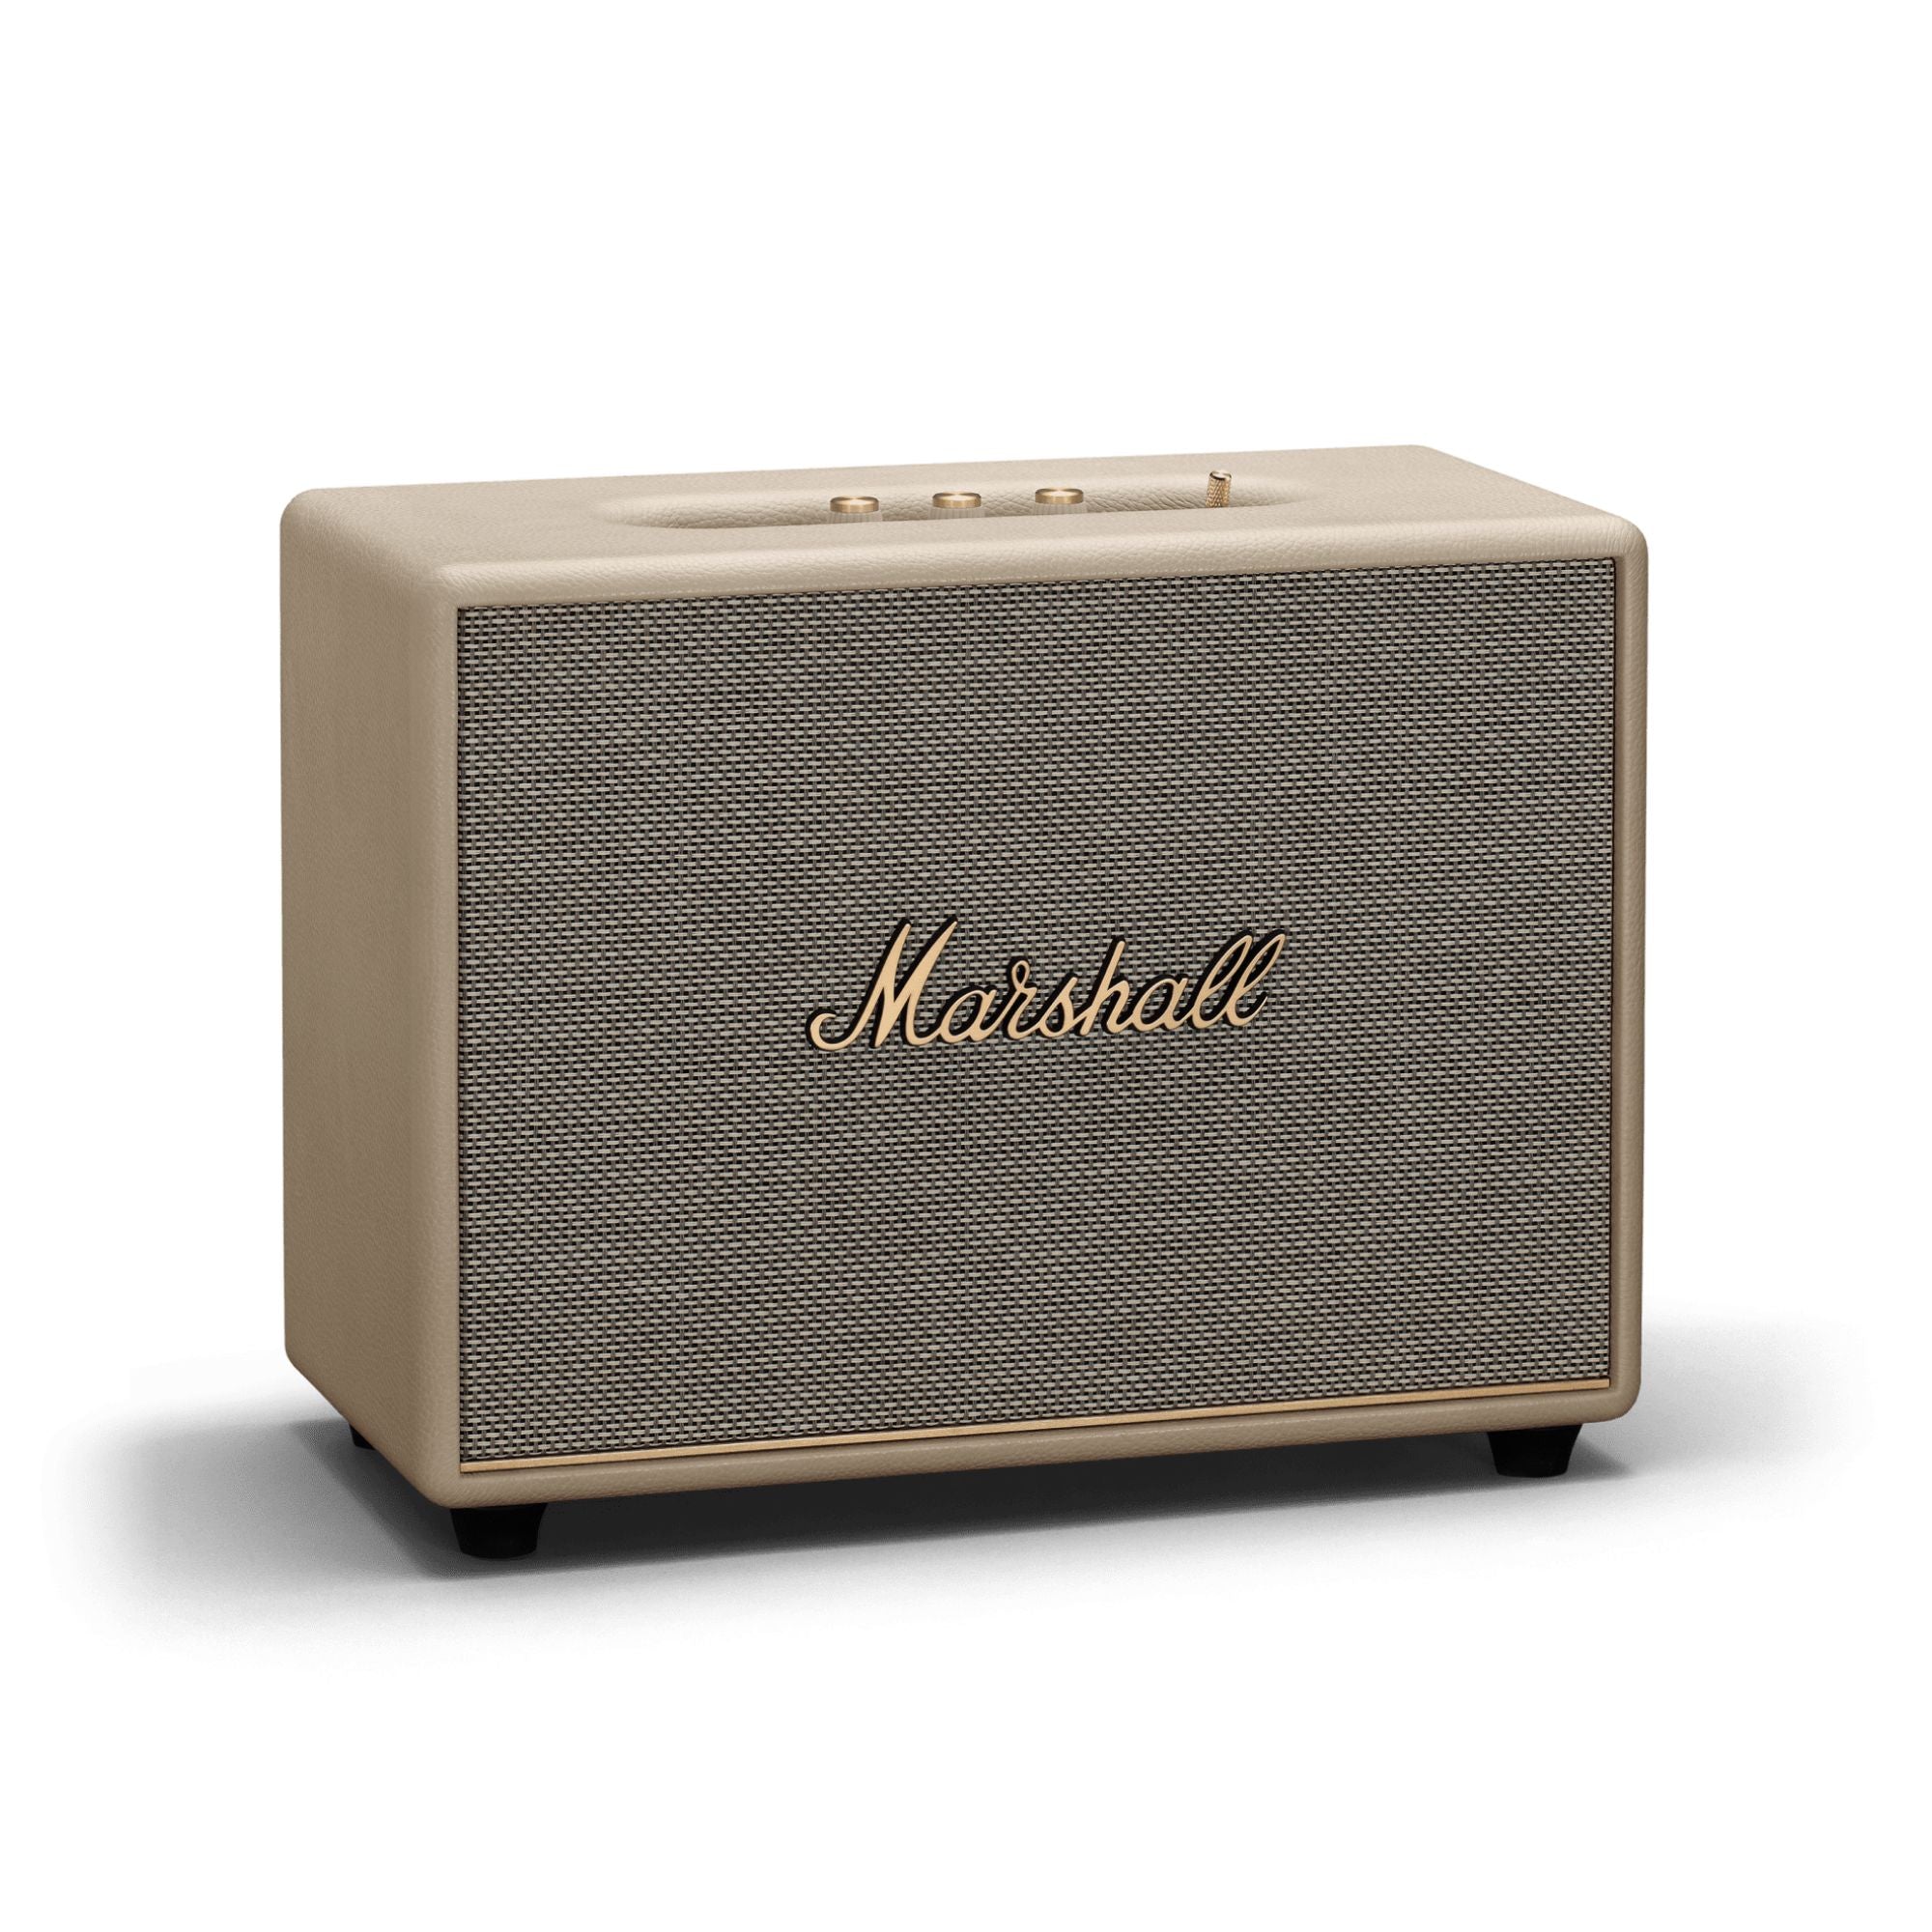 Marshall Woburn III - The Powerful Performer Re-Engineered With a Wider Soundstage, Marshall, Bluetooth Speaker - AVStore.in